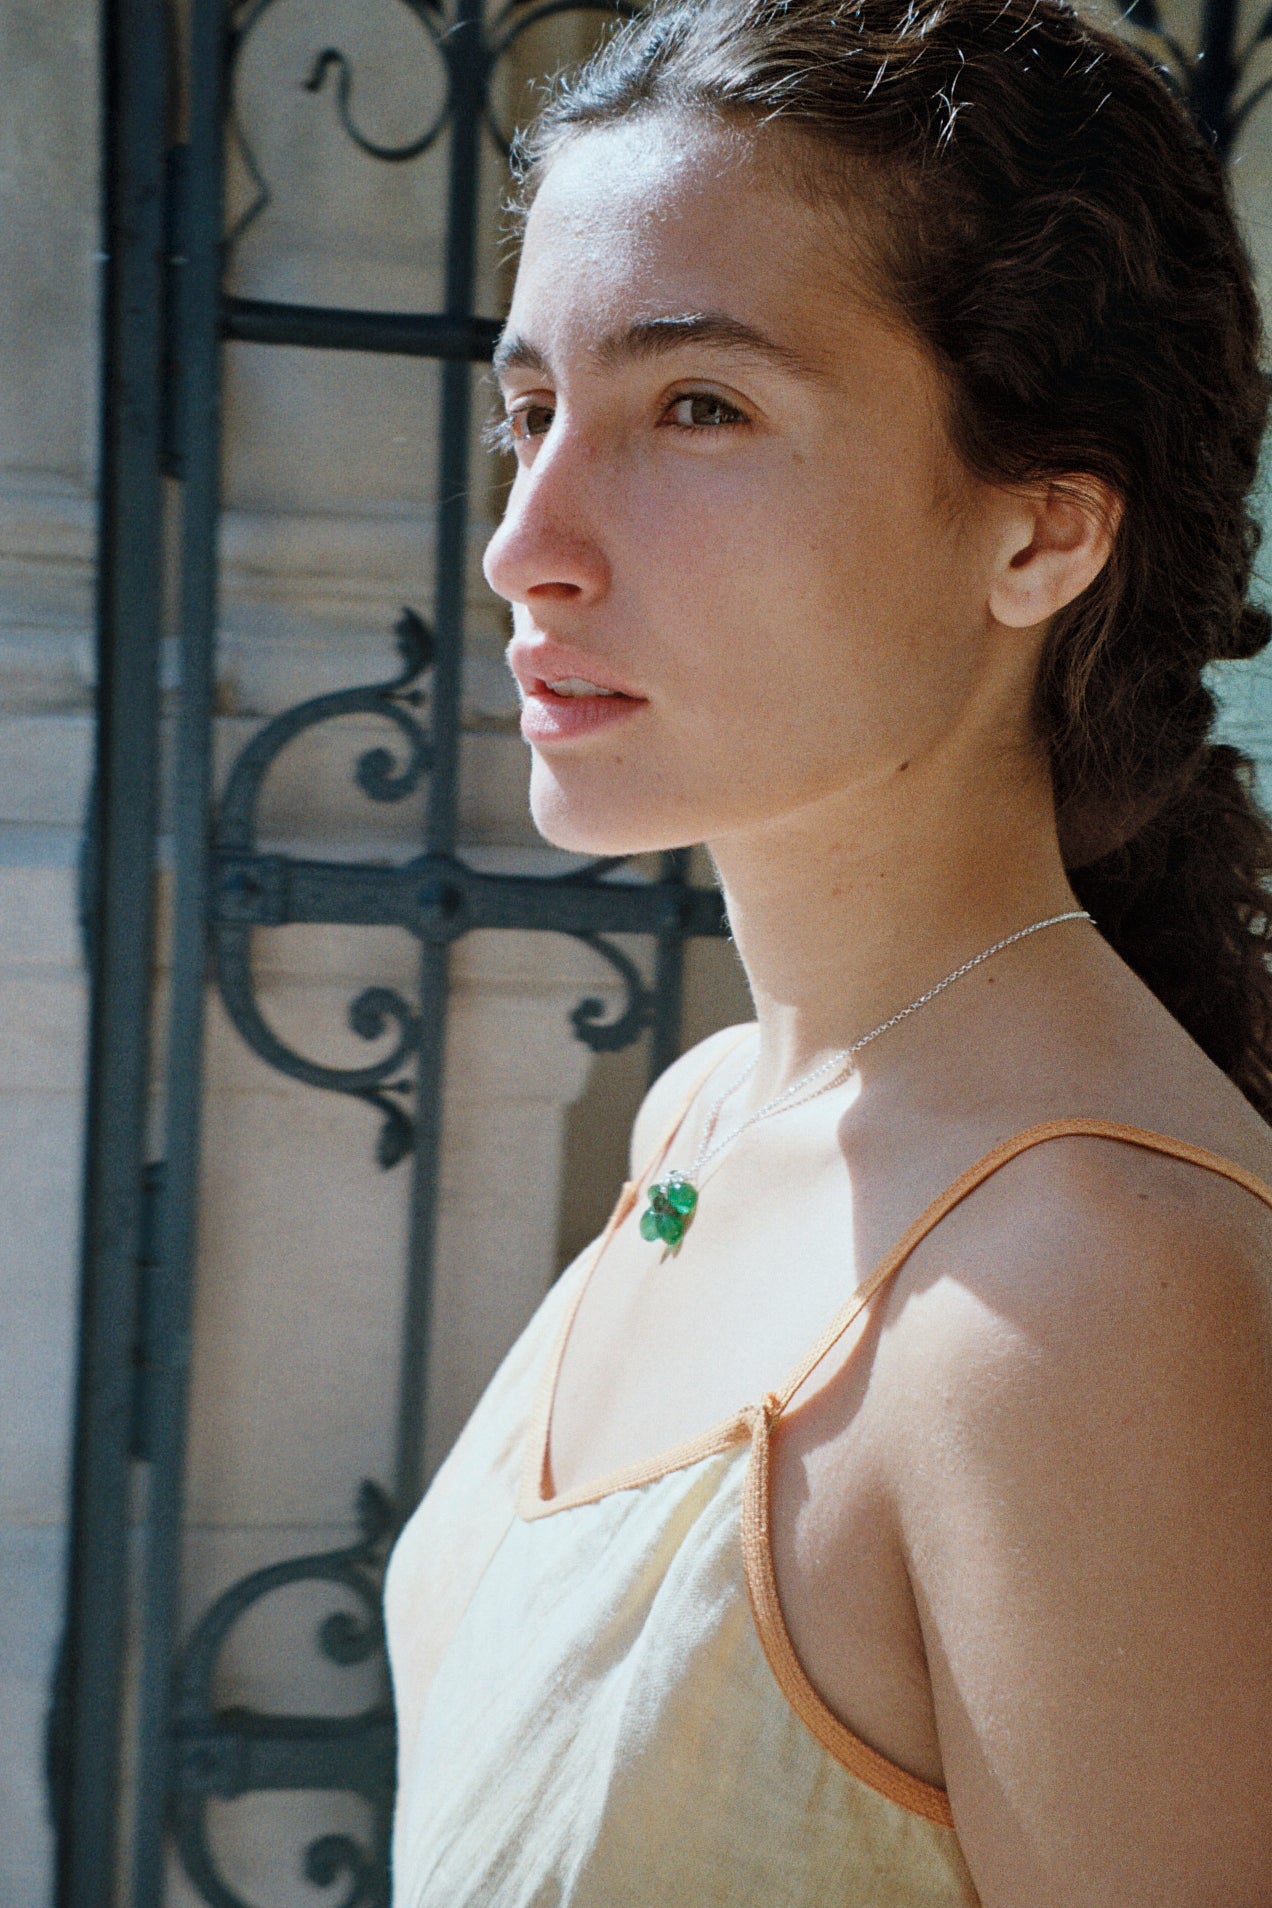 Le Caire necklace - Green